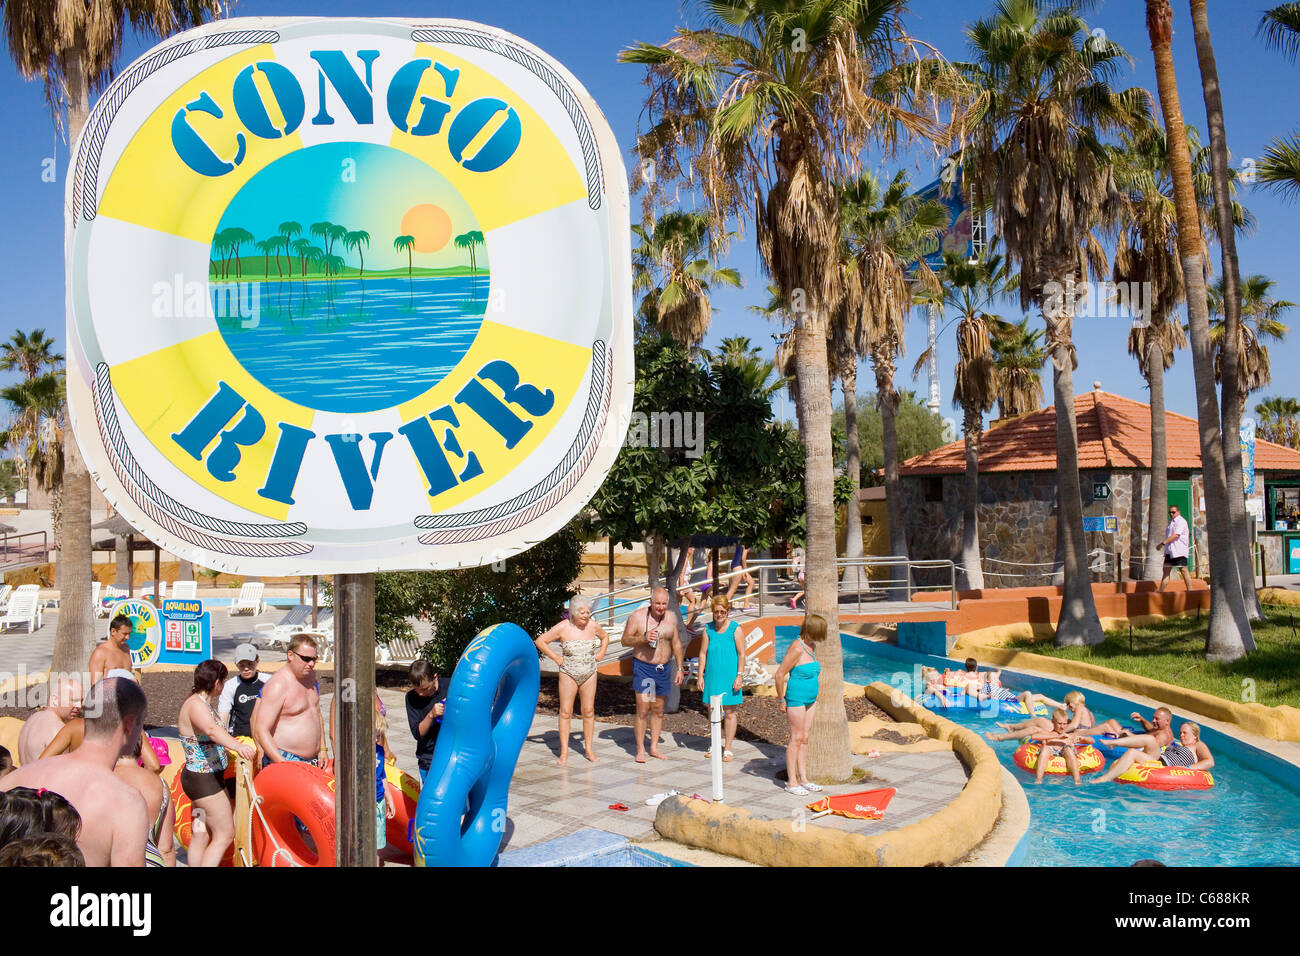 Congo River at Aqualand water park in Tenerife, Spain. Stock Photo